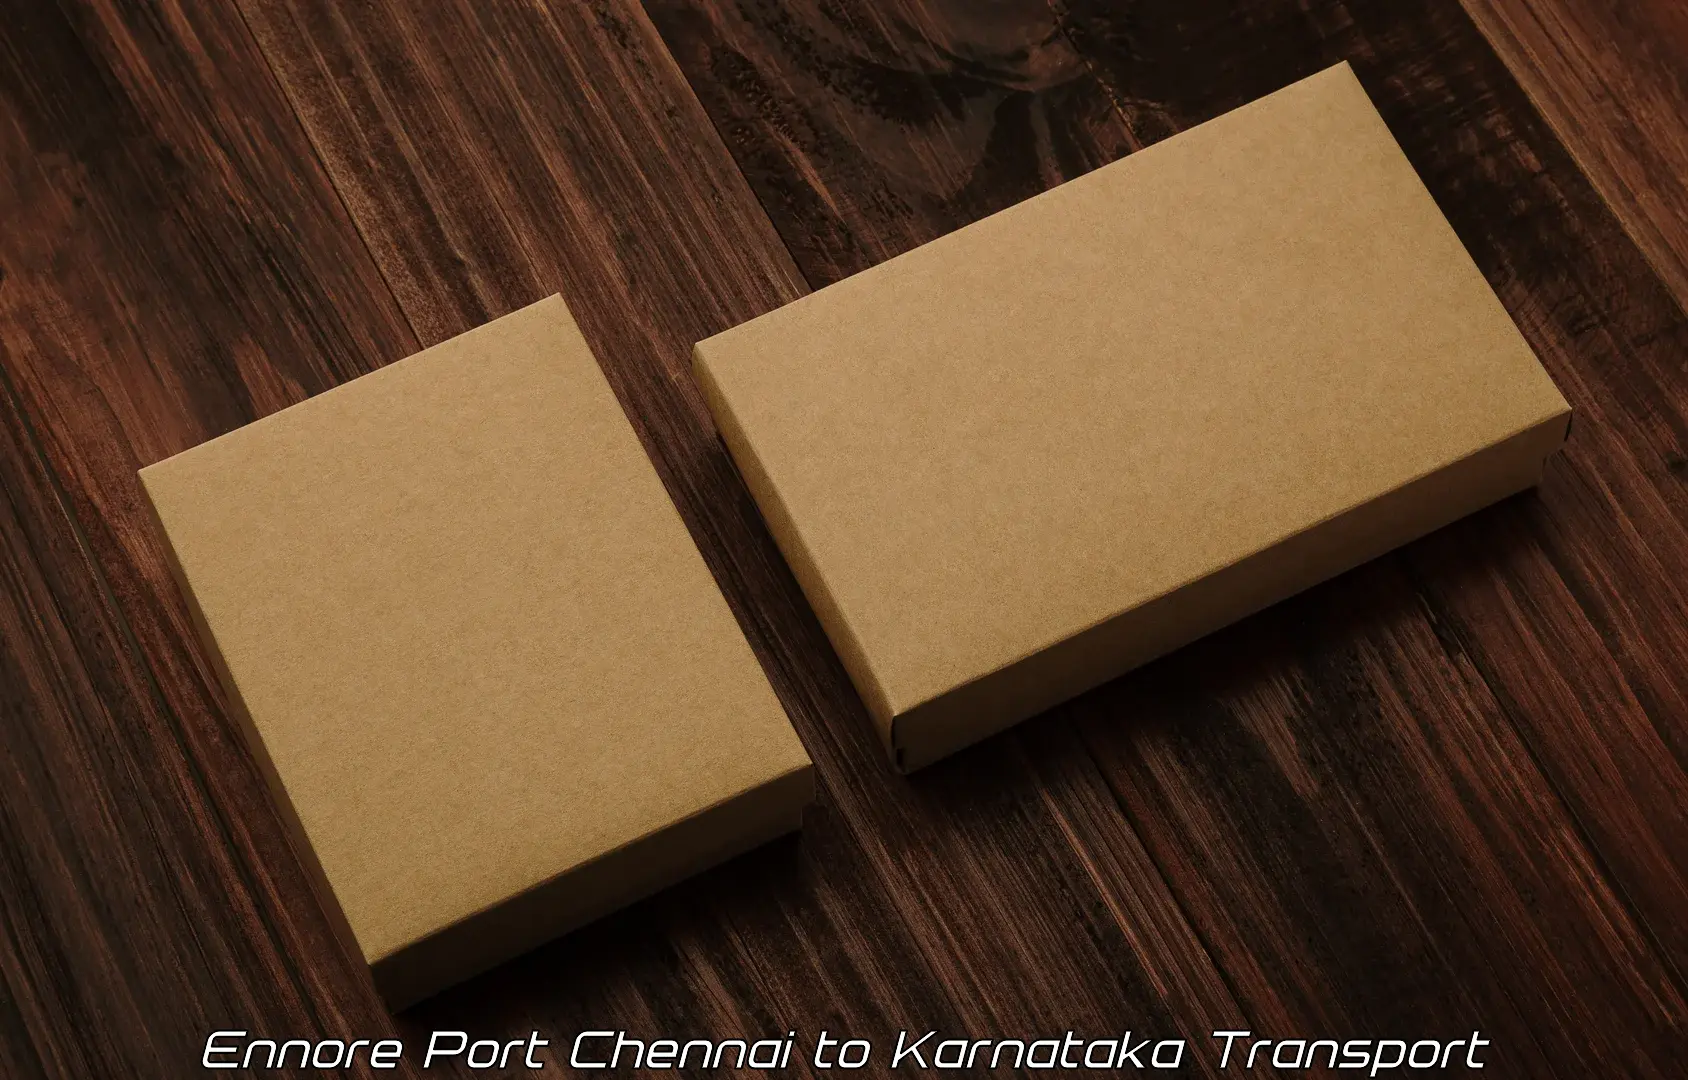 Part load transport service in India Ennore Port Chennai to Ramanathapura